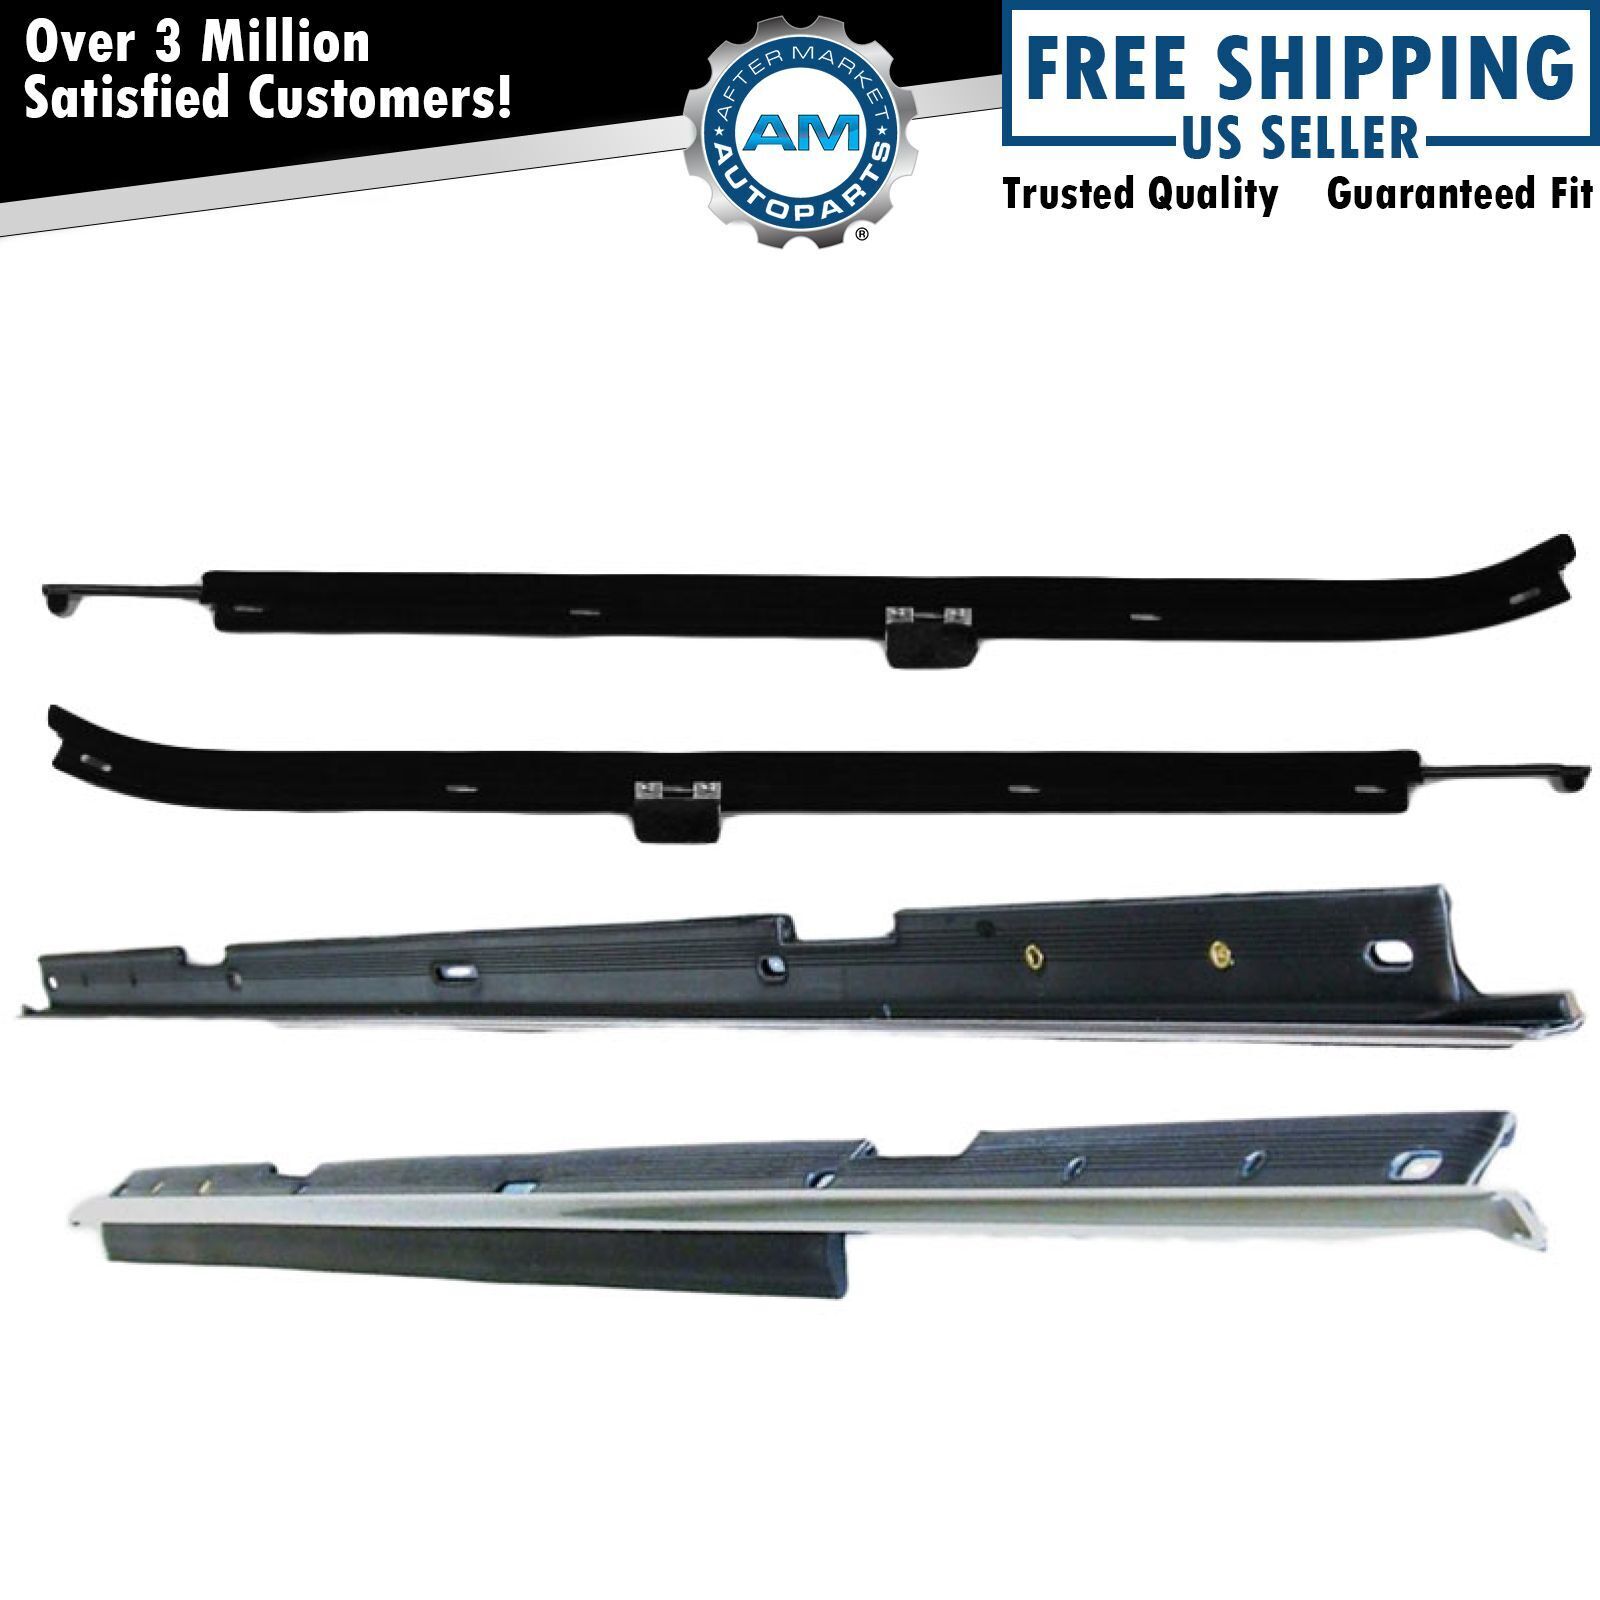 Window Sweeps Felt Seal Front & Rear Outer Belt for Chevy Caprice Impala Sedan